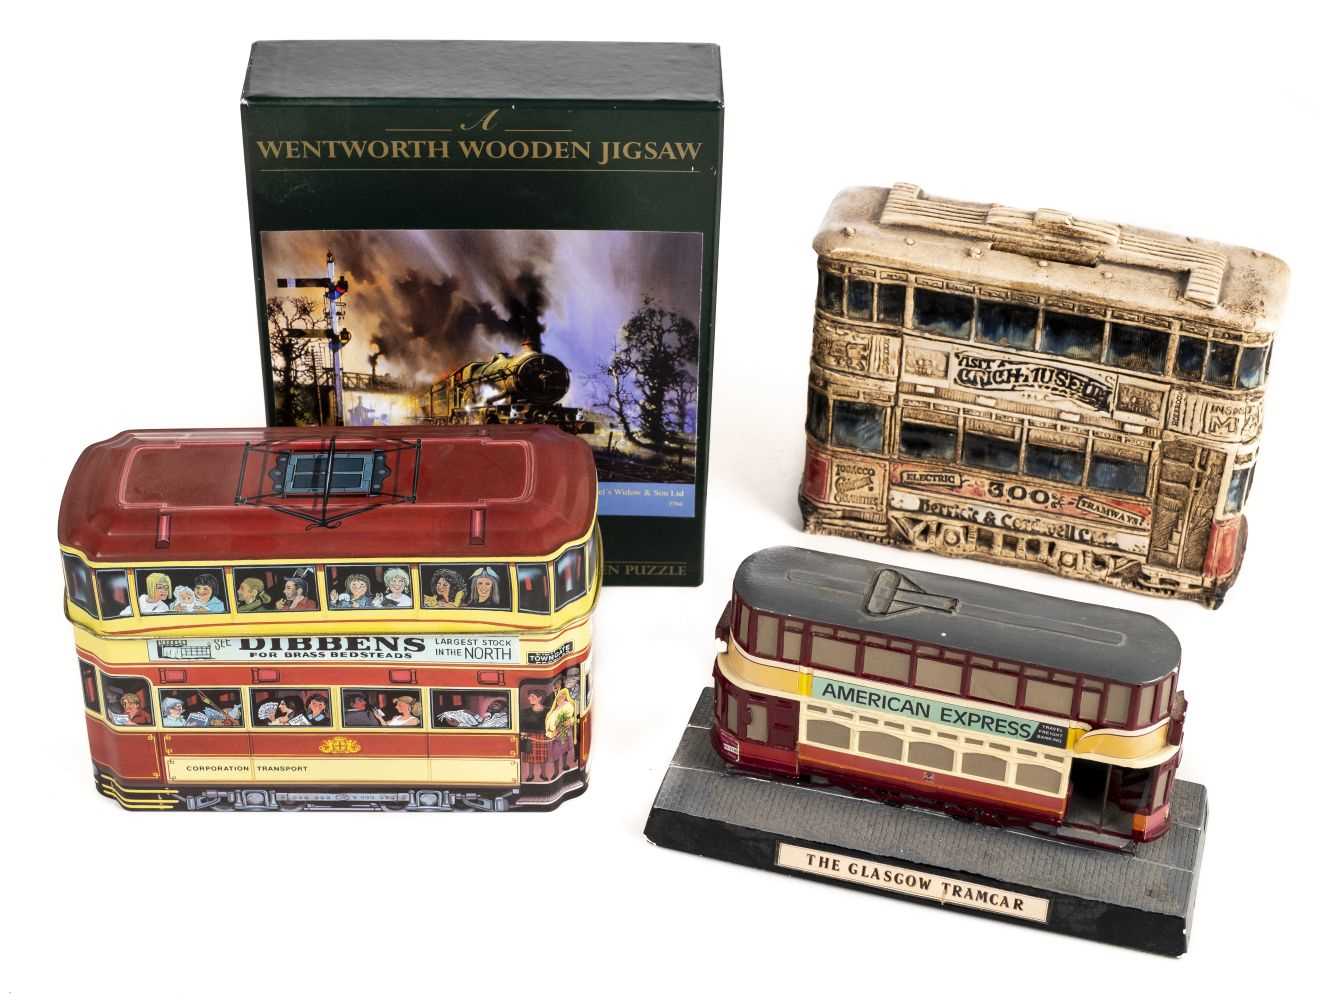 Lot 7 - Trams - Collectable tins. A collection of tram car form biscuit tins, money boxes and related